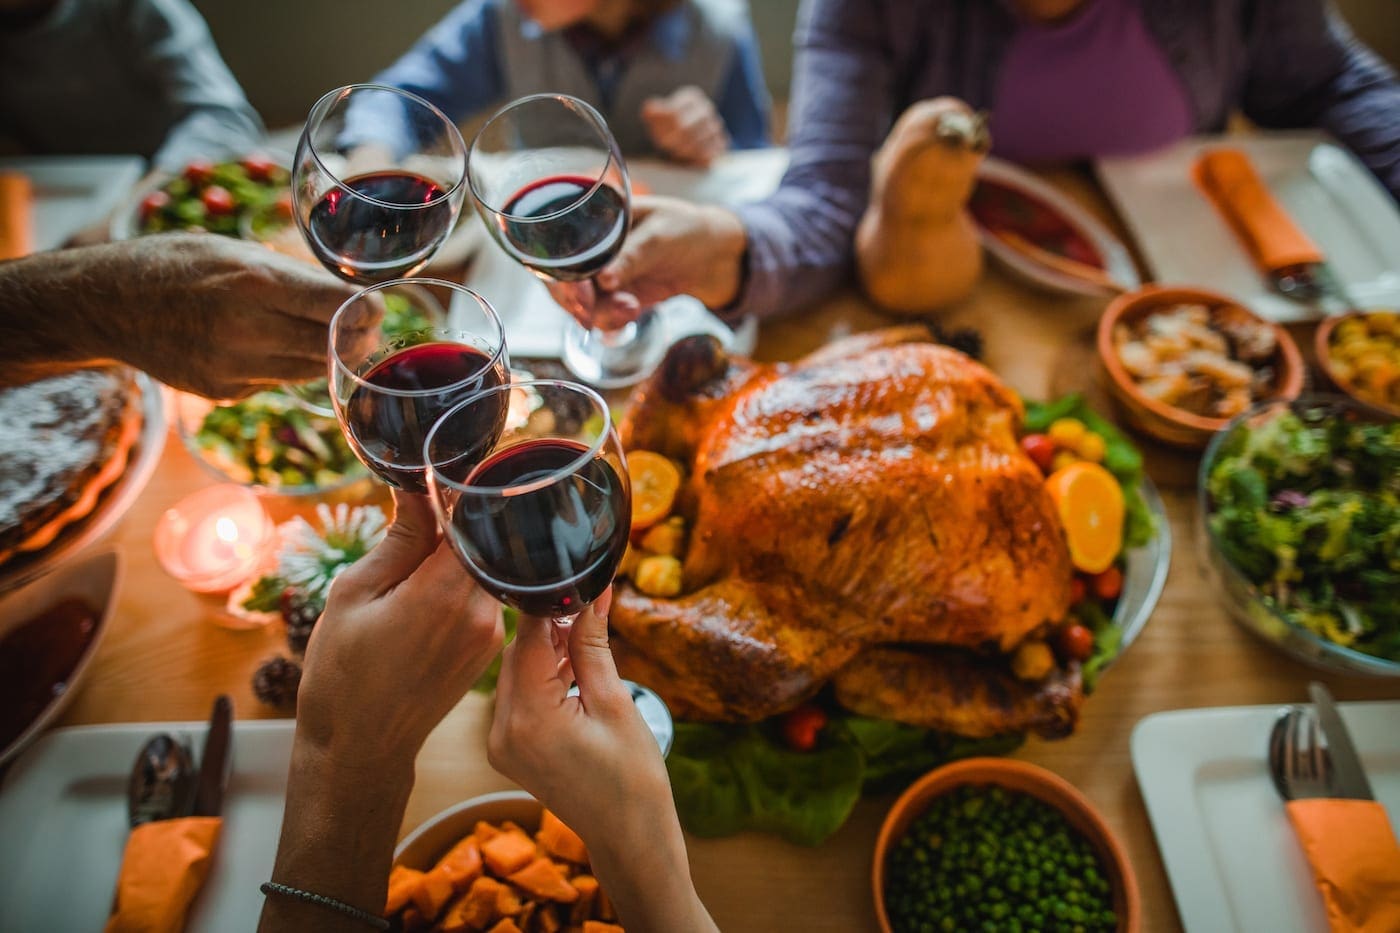 Group of people sitting around a table on Thanksgiving day toasting with glasses of red wine